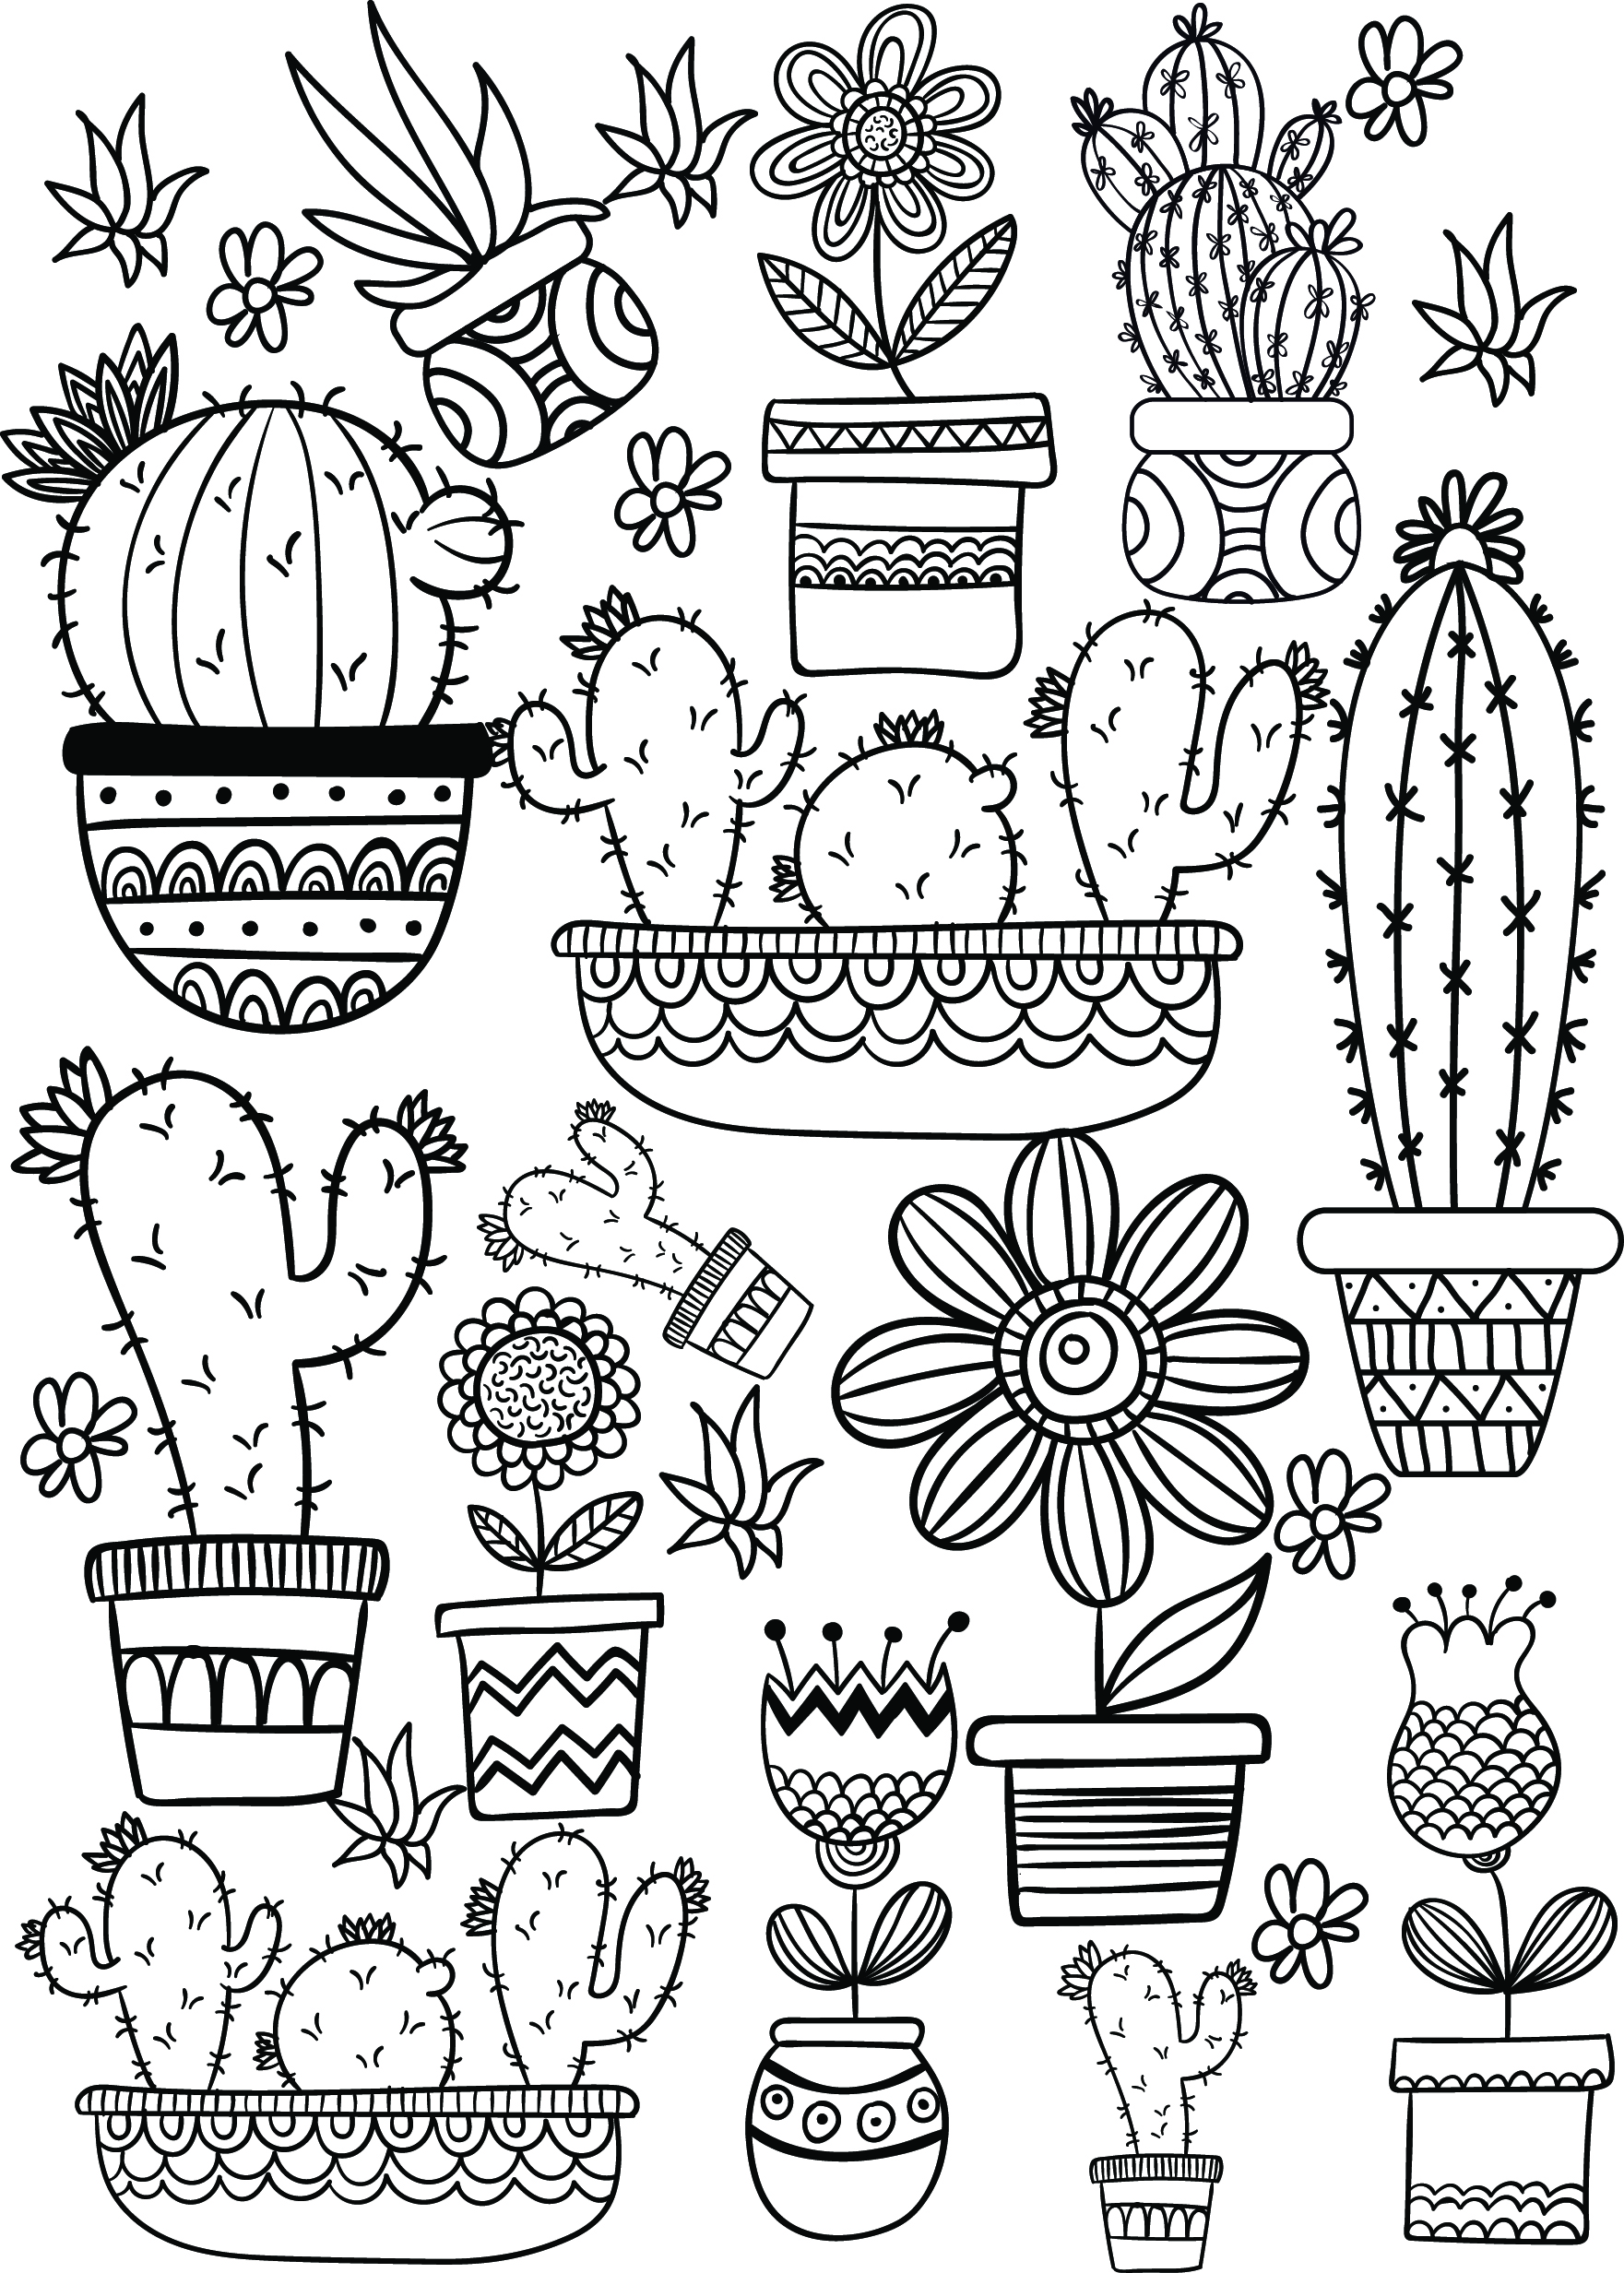 Cactus and succulent printable adult coloring pages